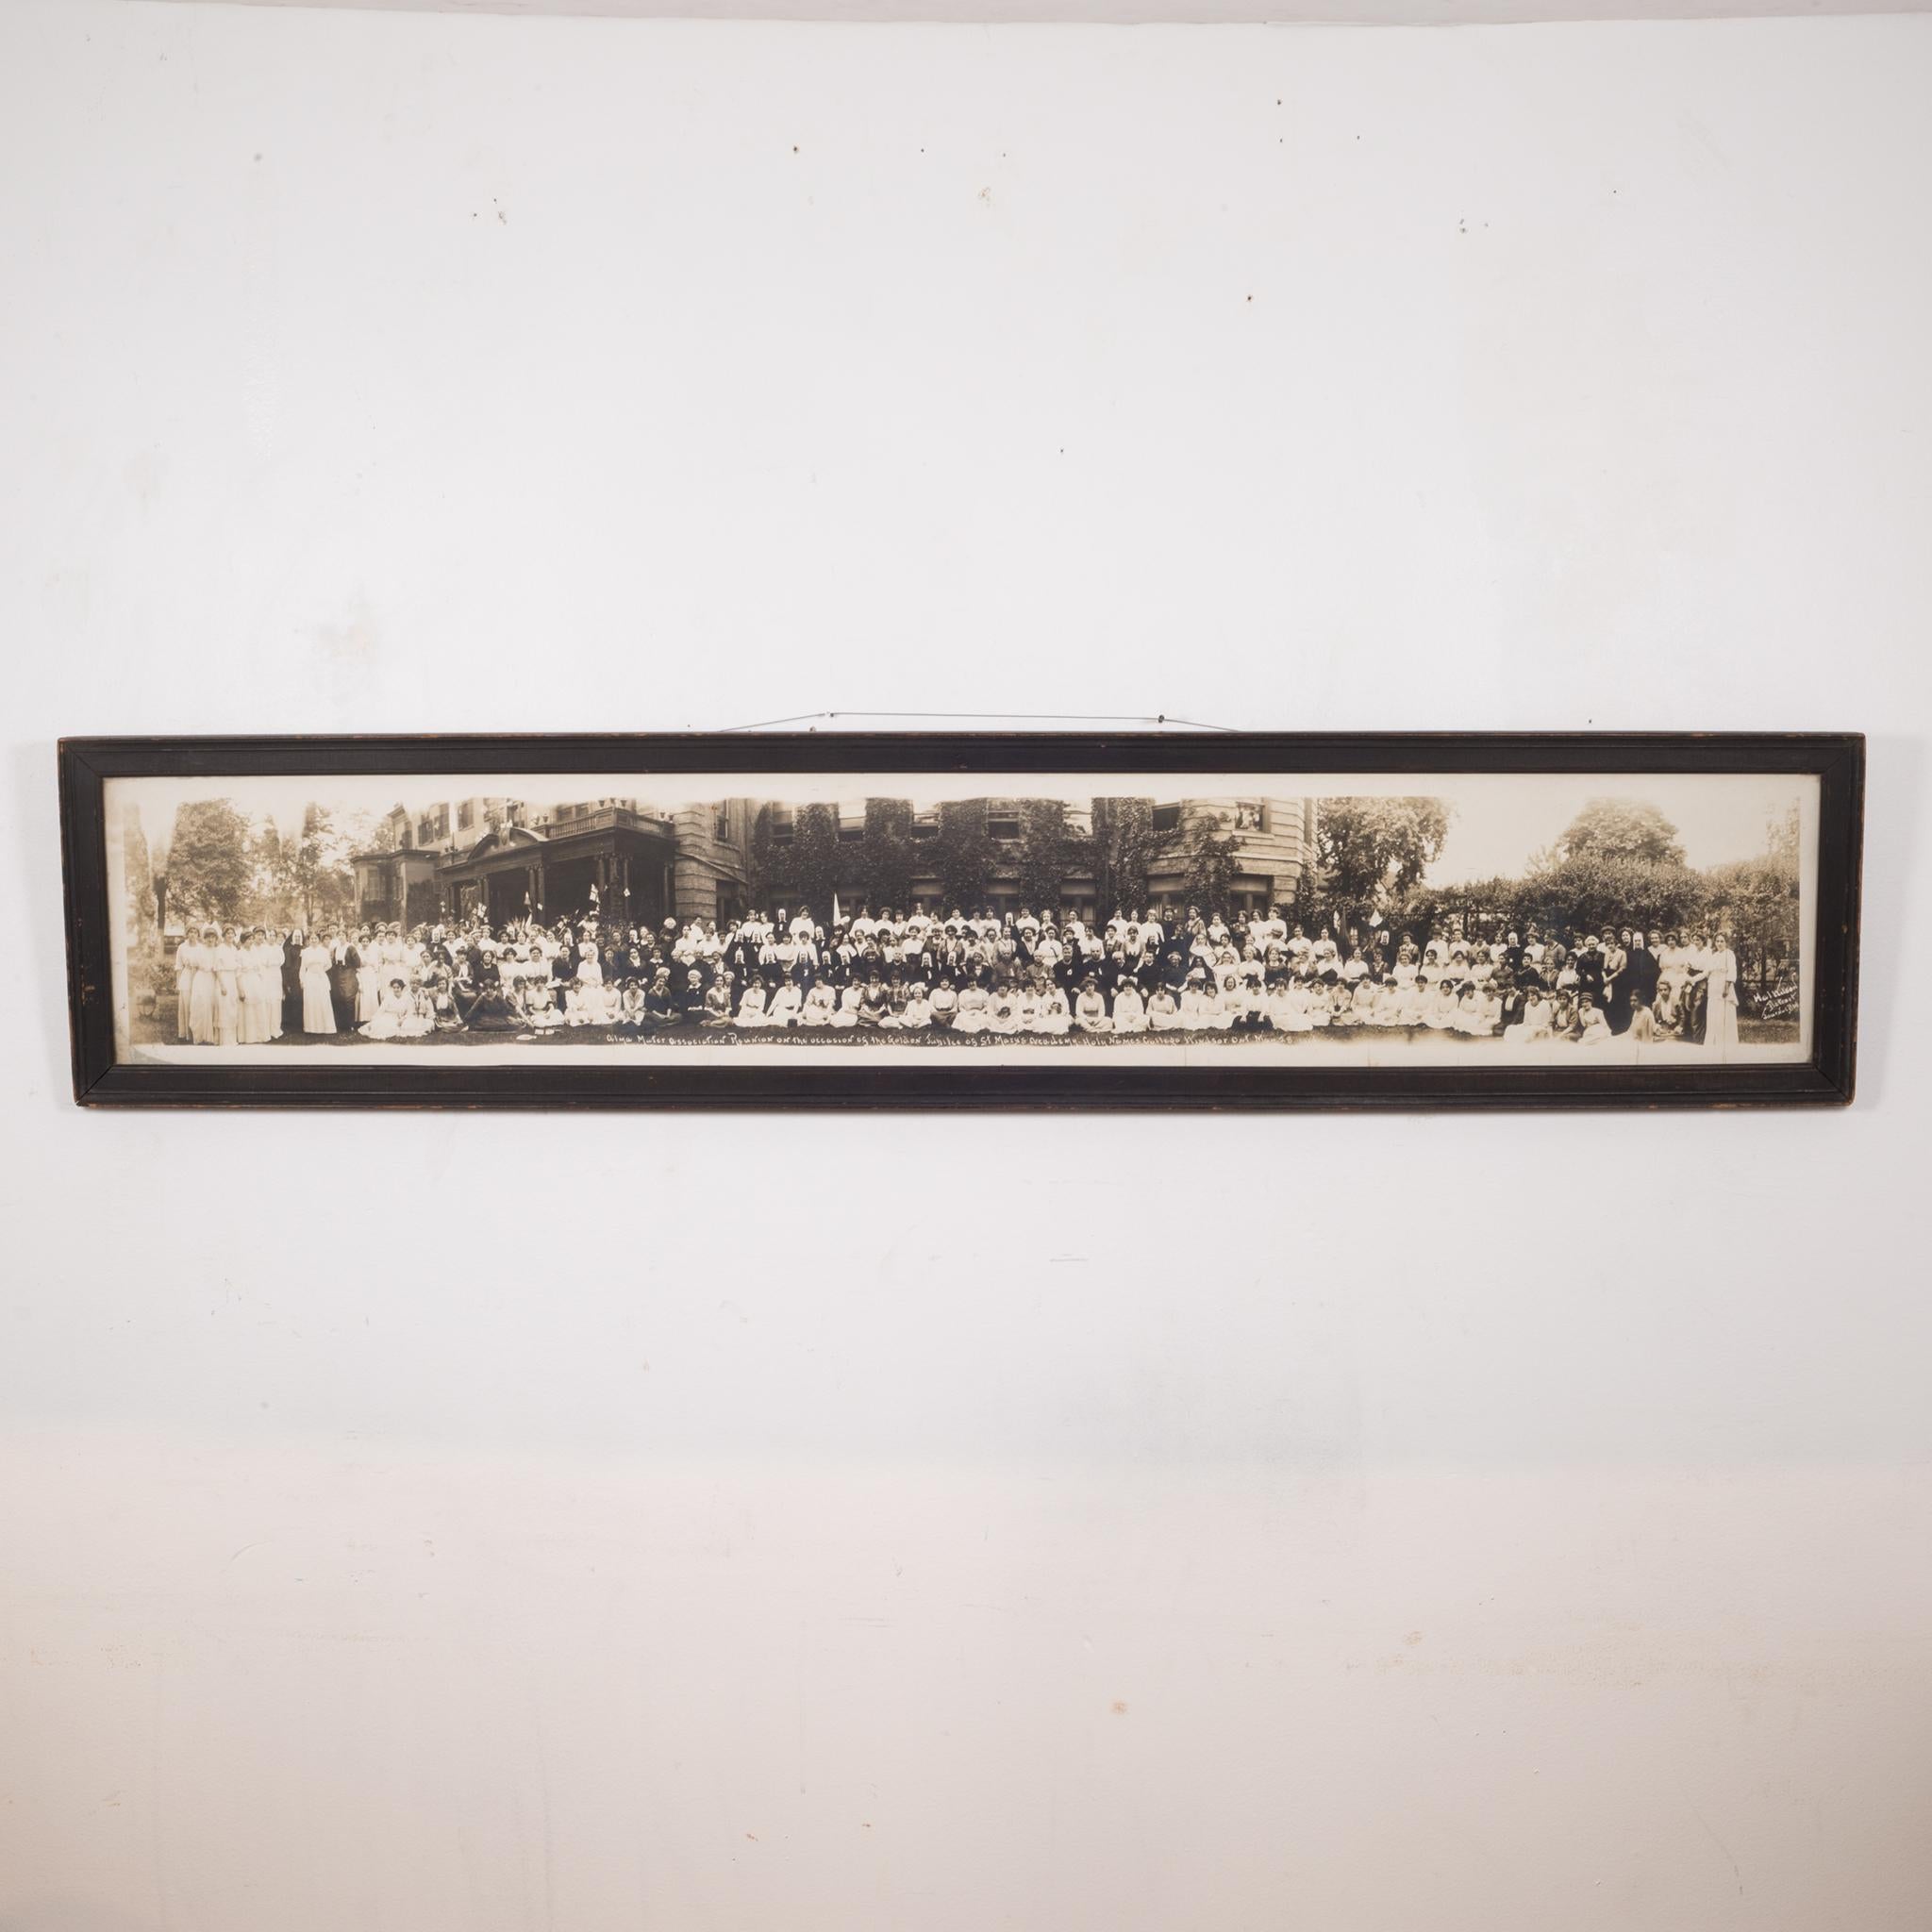 About

An original panoramic photo of a reunion of the alma mater St. Mary's Academy Holy Names College, 1914. The photo is black and white and framed in the original wooden frame. The picture has retained its original crispness. The frame is in